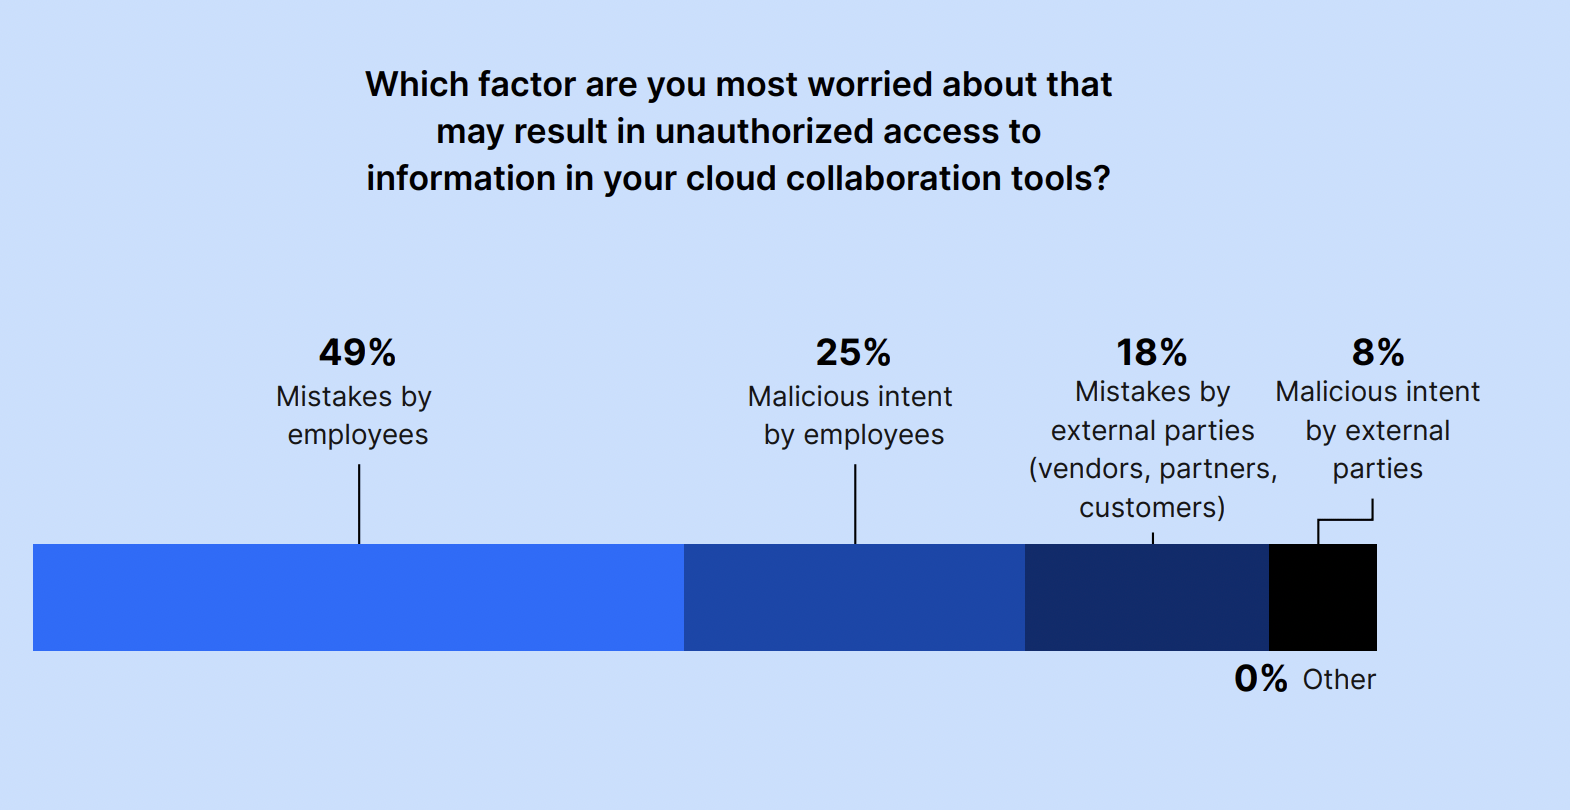 Which factor are you most worried about that may result in unauthorized access to information in your cloud collaboration tools?